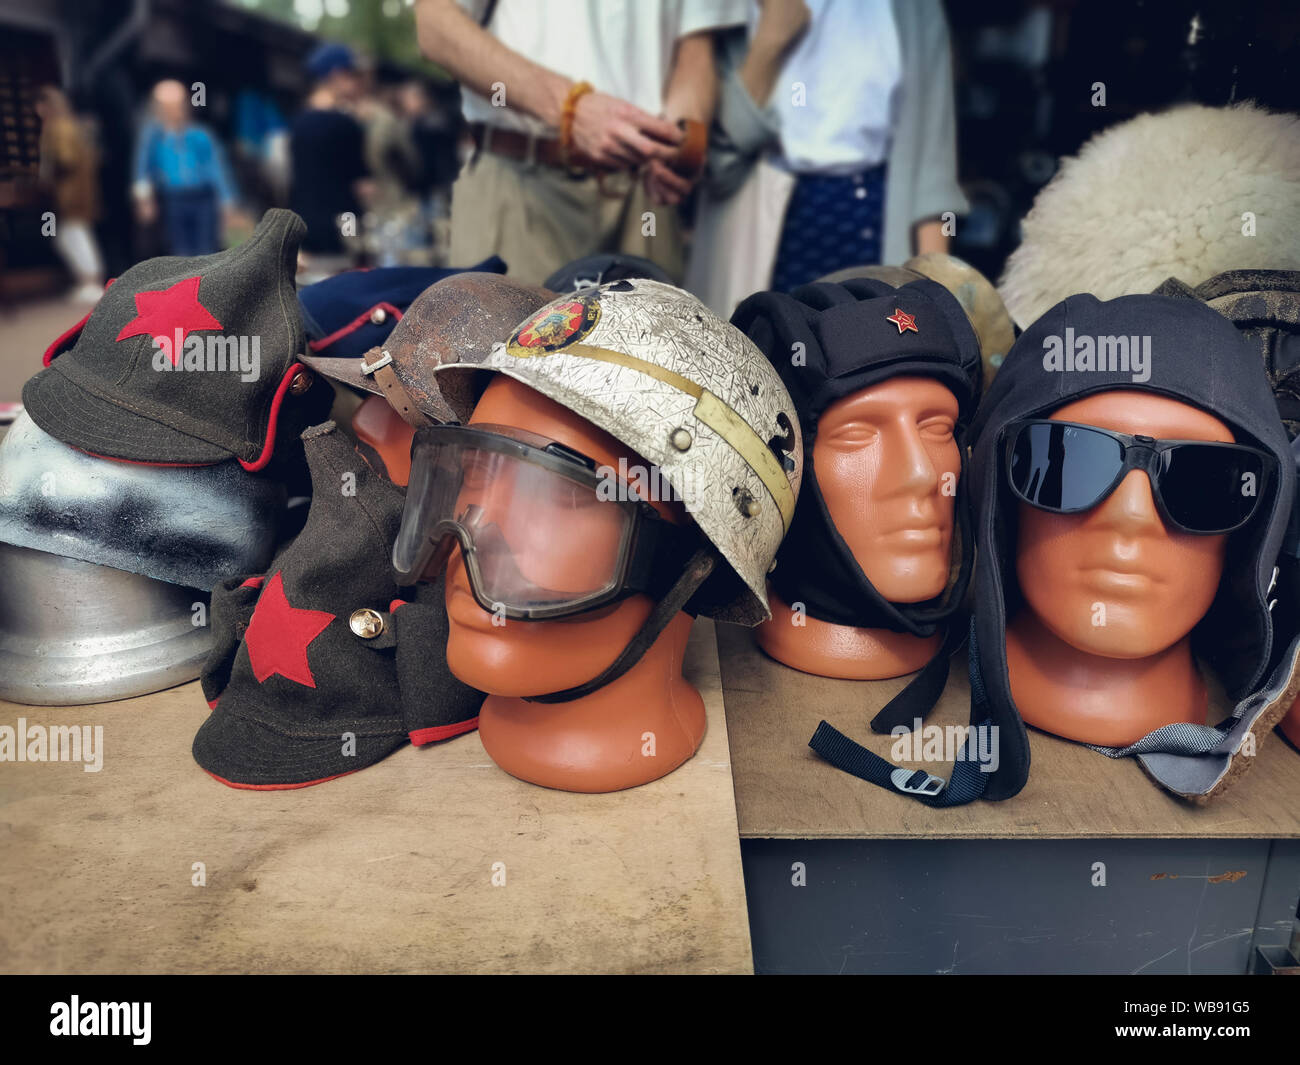 Saint-Petersburg, Russia - 22 July 2019: aviation helmets and cap Soviet times revolution and sunglasses on a mannequin, at the Flea market. Stock Photo